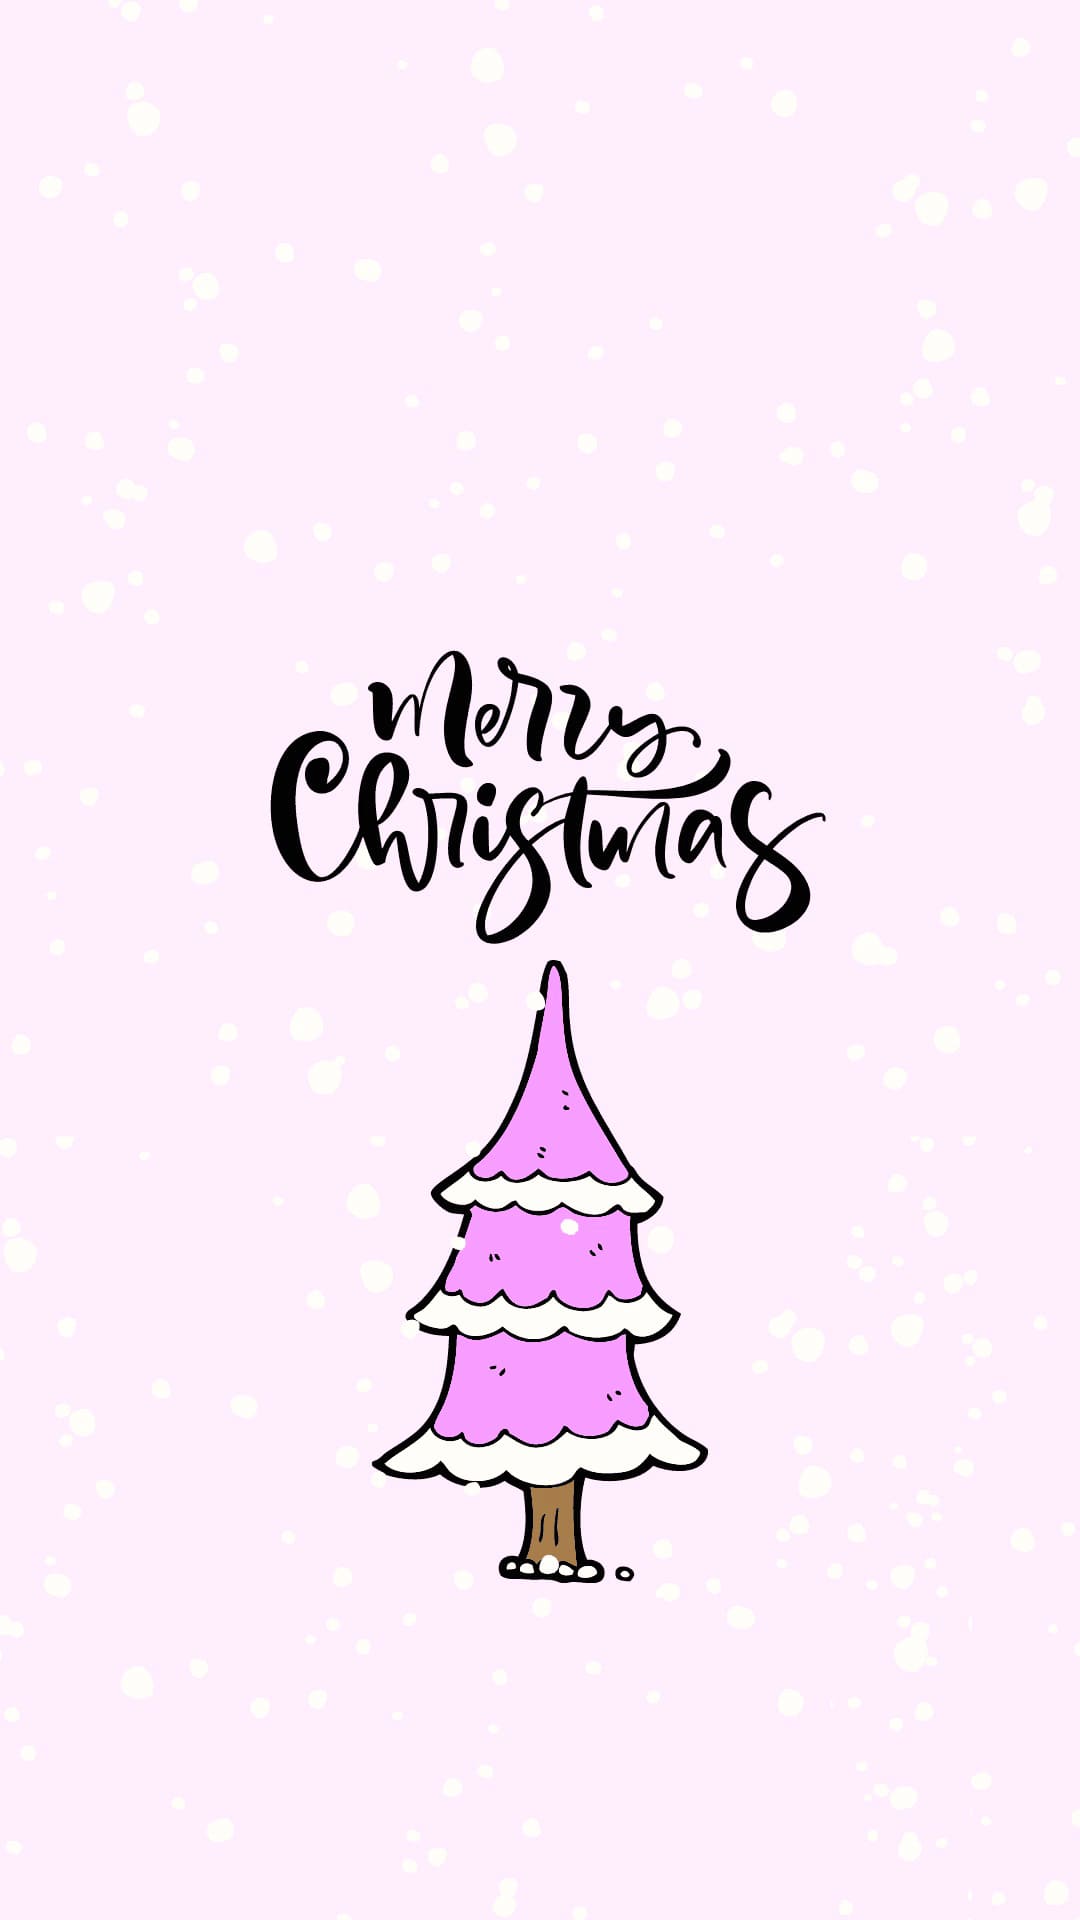 Merry Christmas Wallpapers